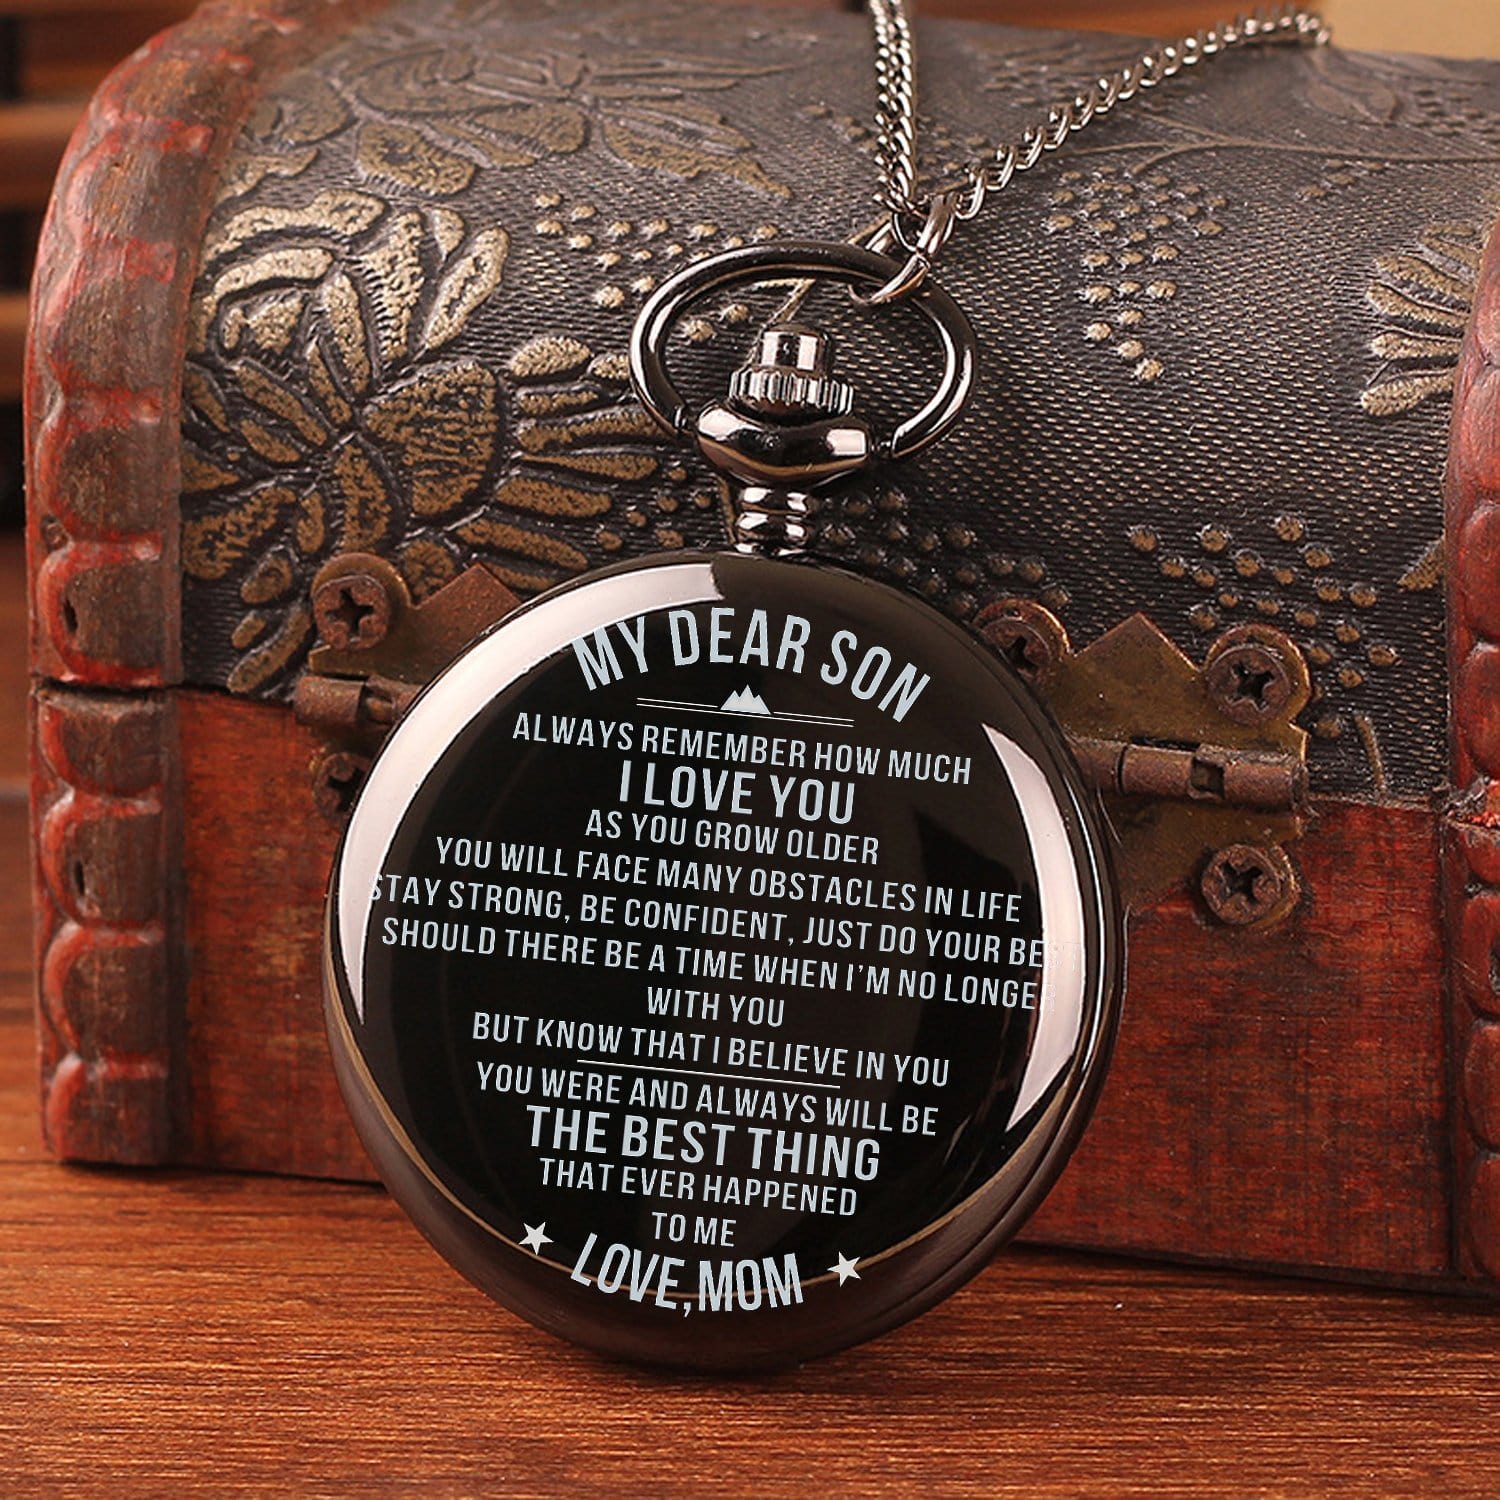 Pocket Watches Mom To Son - The Best Thing To Me Pocket Watch GiveMe-Gifts